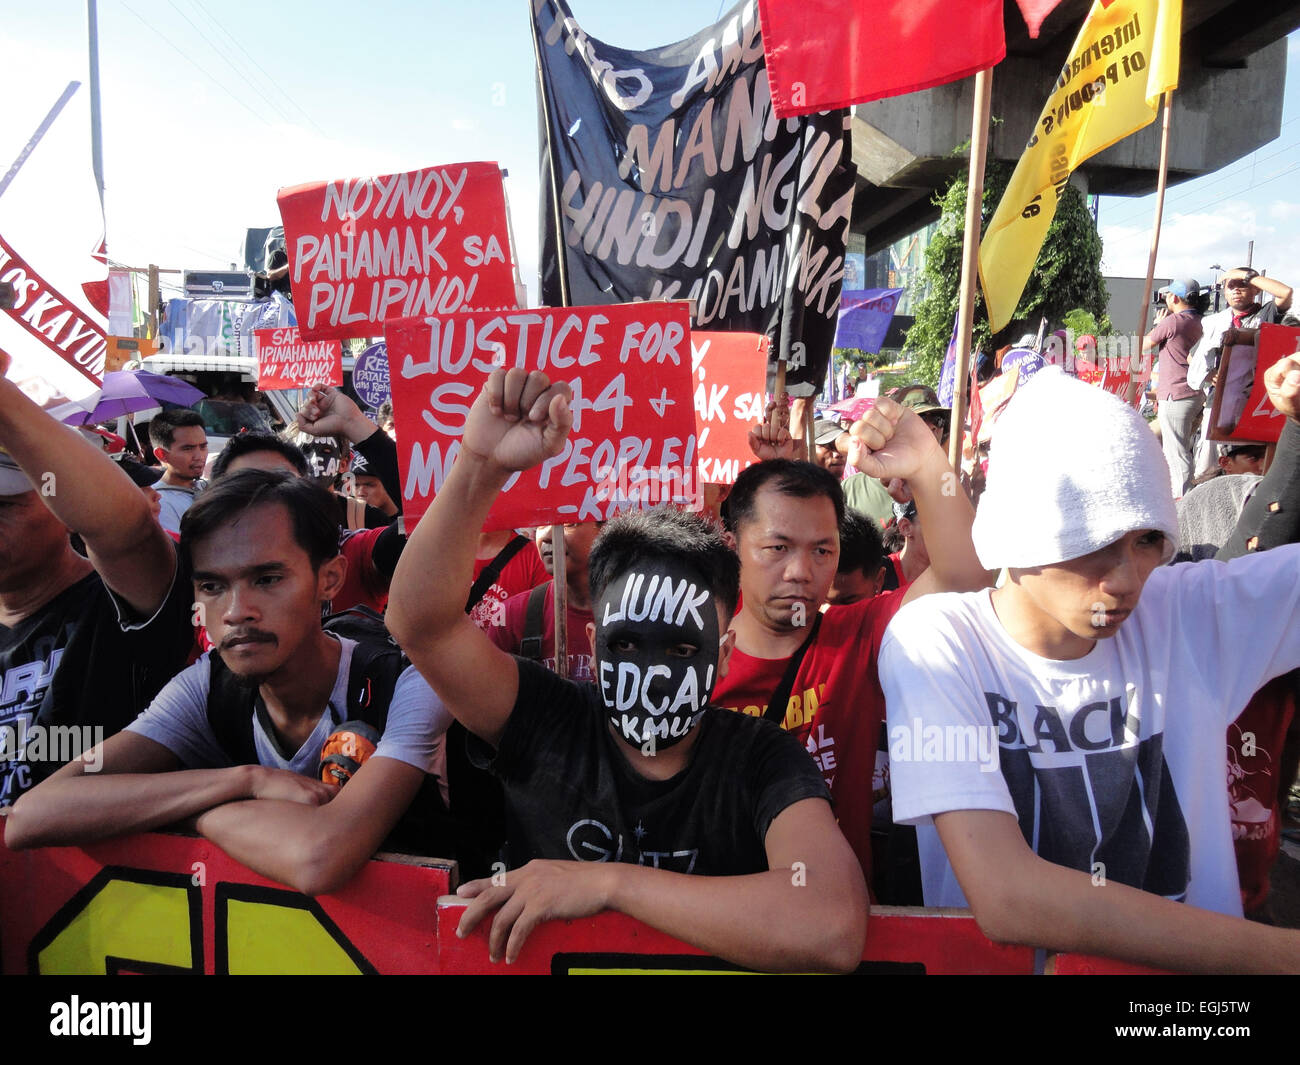 Militant protesters chanting slogans raise their fists during a rally at EDSA highway, held on the 29th anniversary of the 1986 People Power revolution. The protesters were blocked by police from reaching the police headquarters where they intended to form a 'human chain' from the headquarters to EDSA Shrine. Credit:  Richard James Mendoza/Pacific Press/Alamy Live News Stock Photo